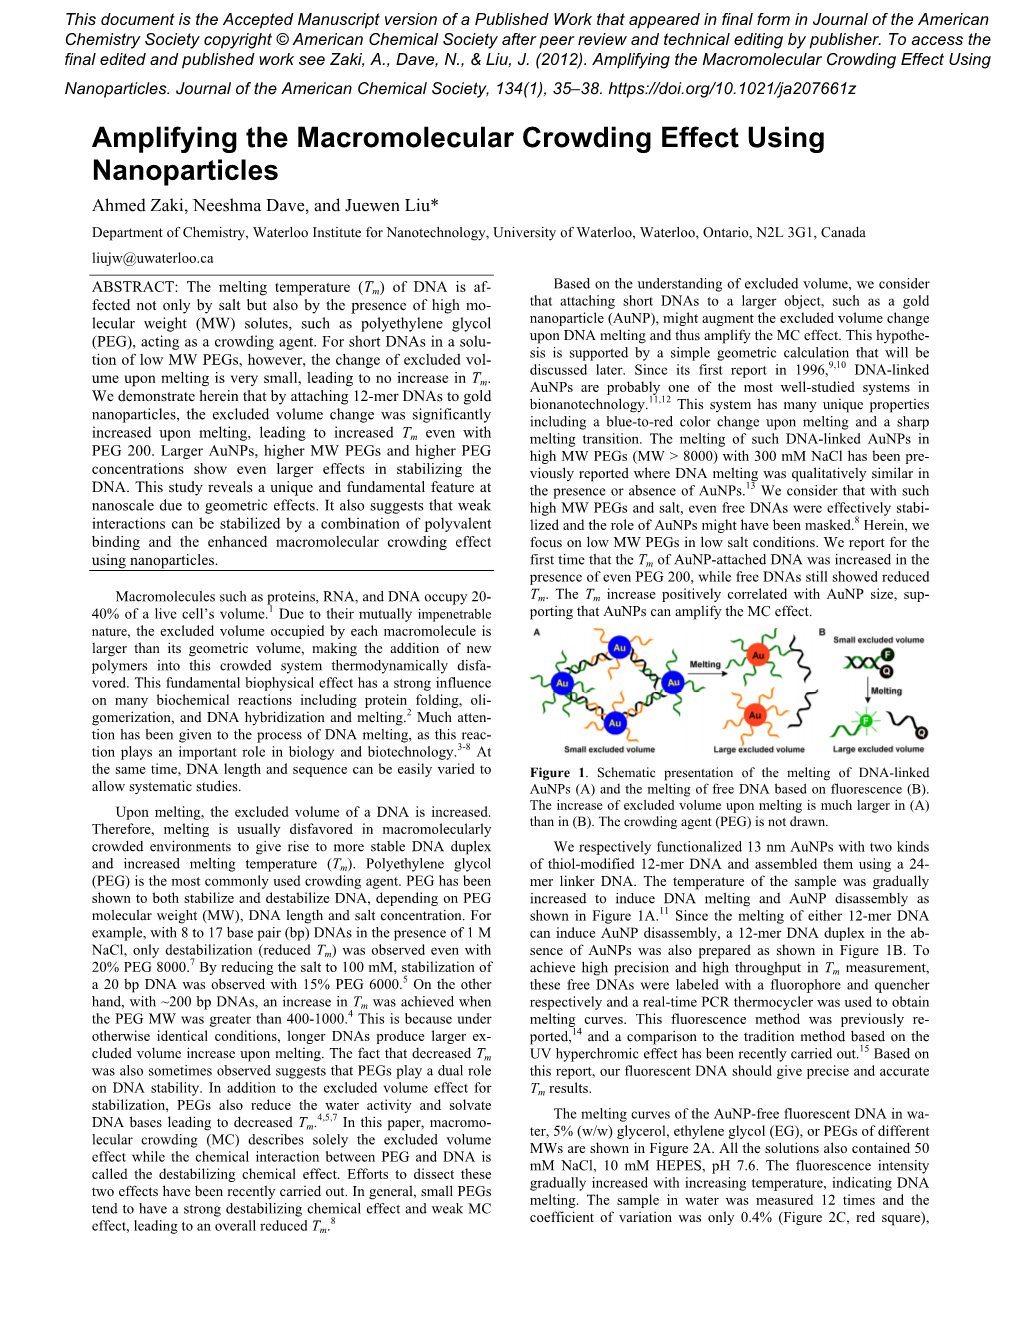 Amplifying the Macromolecular Crowding Effect Using Nanoparticles